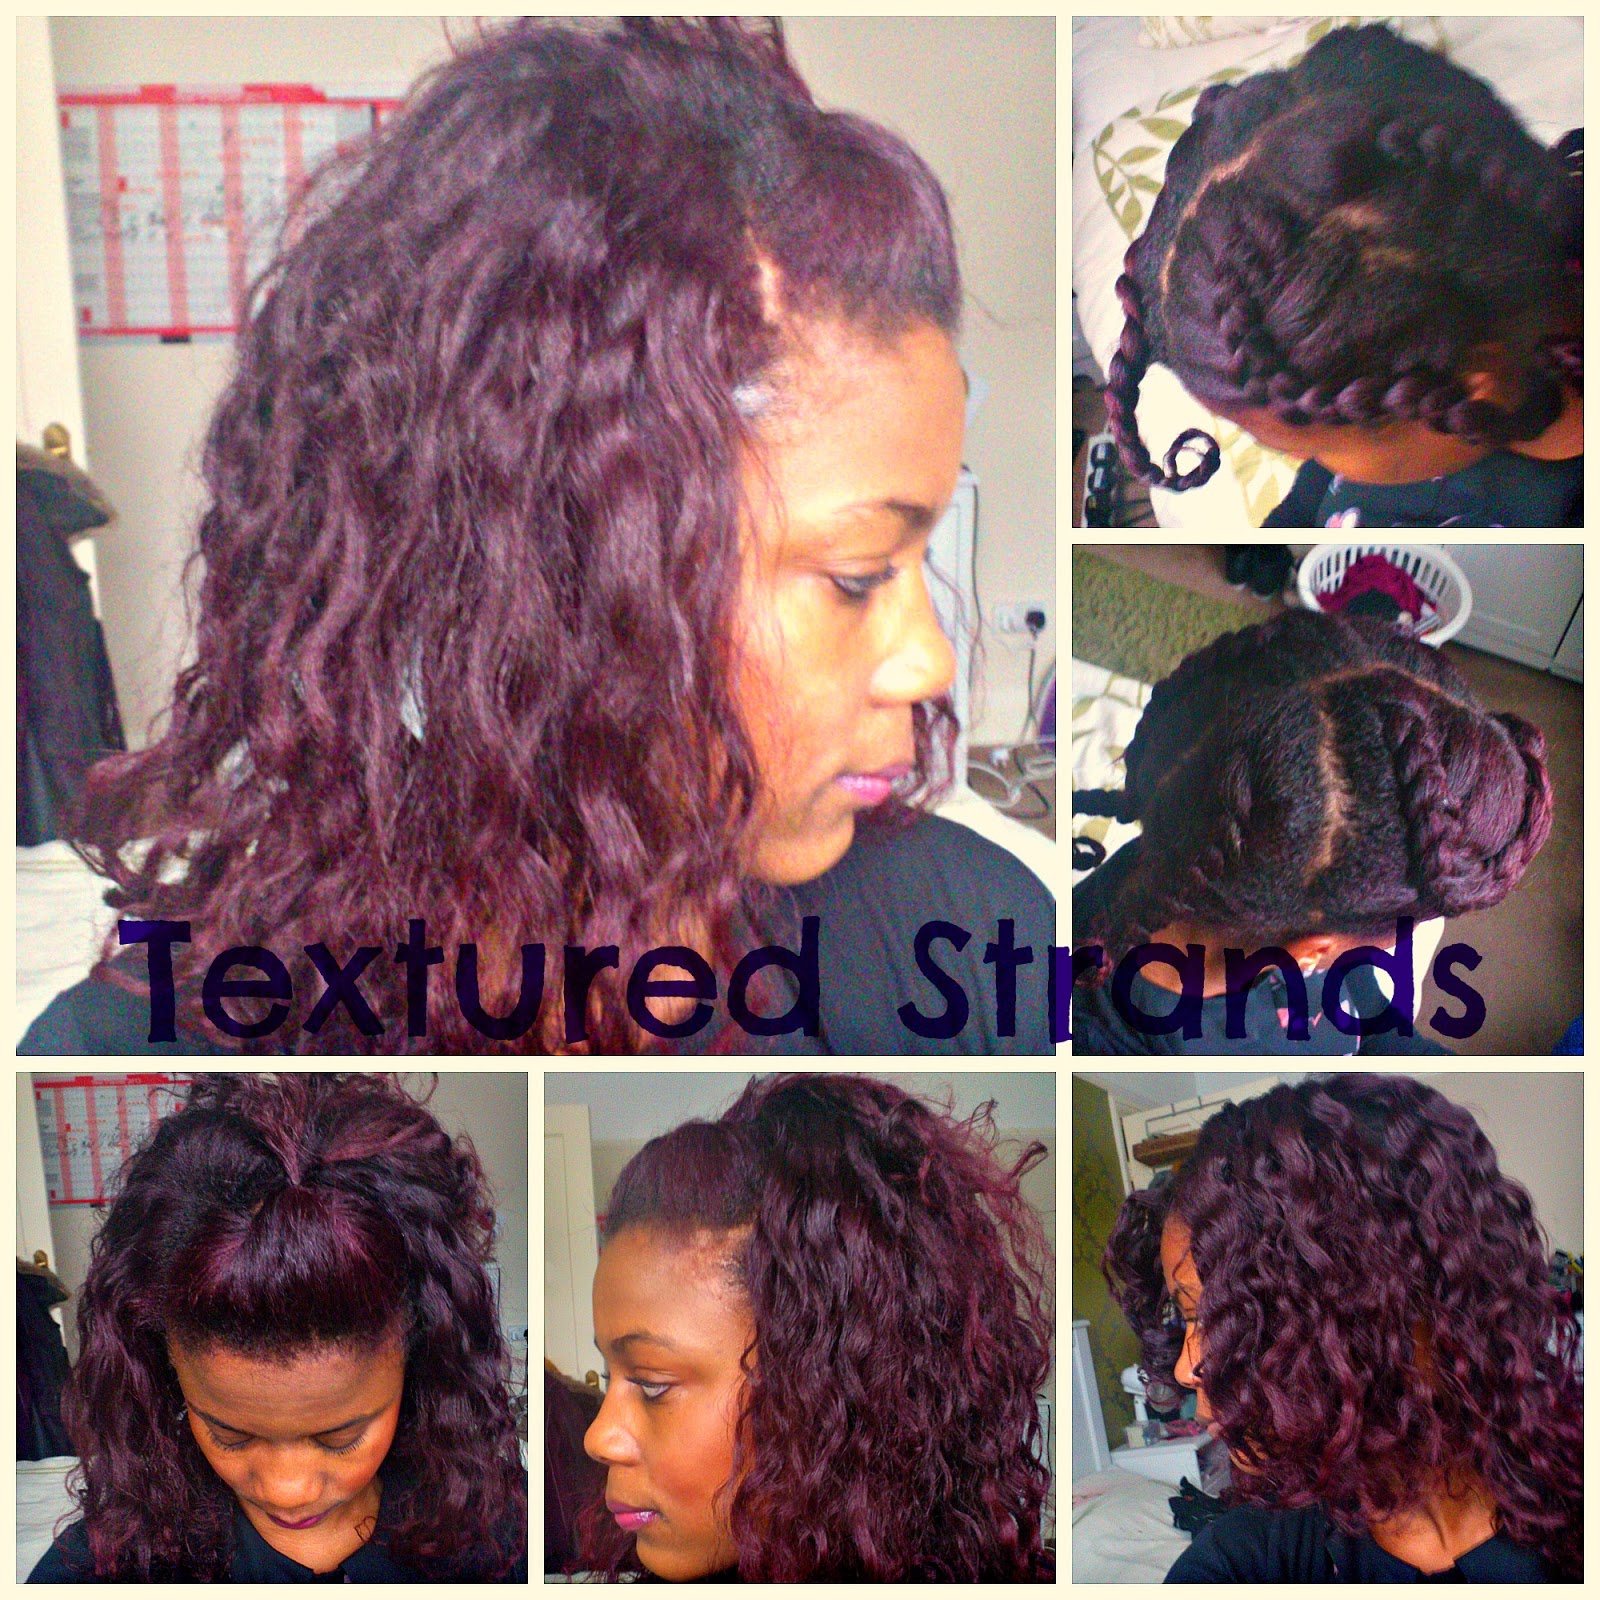 Textured Strands: Relaxer Day - October 2013